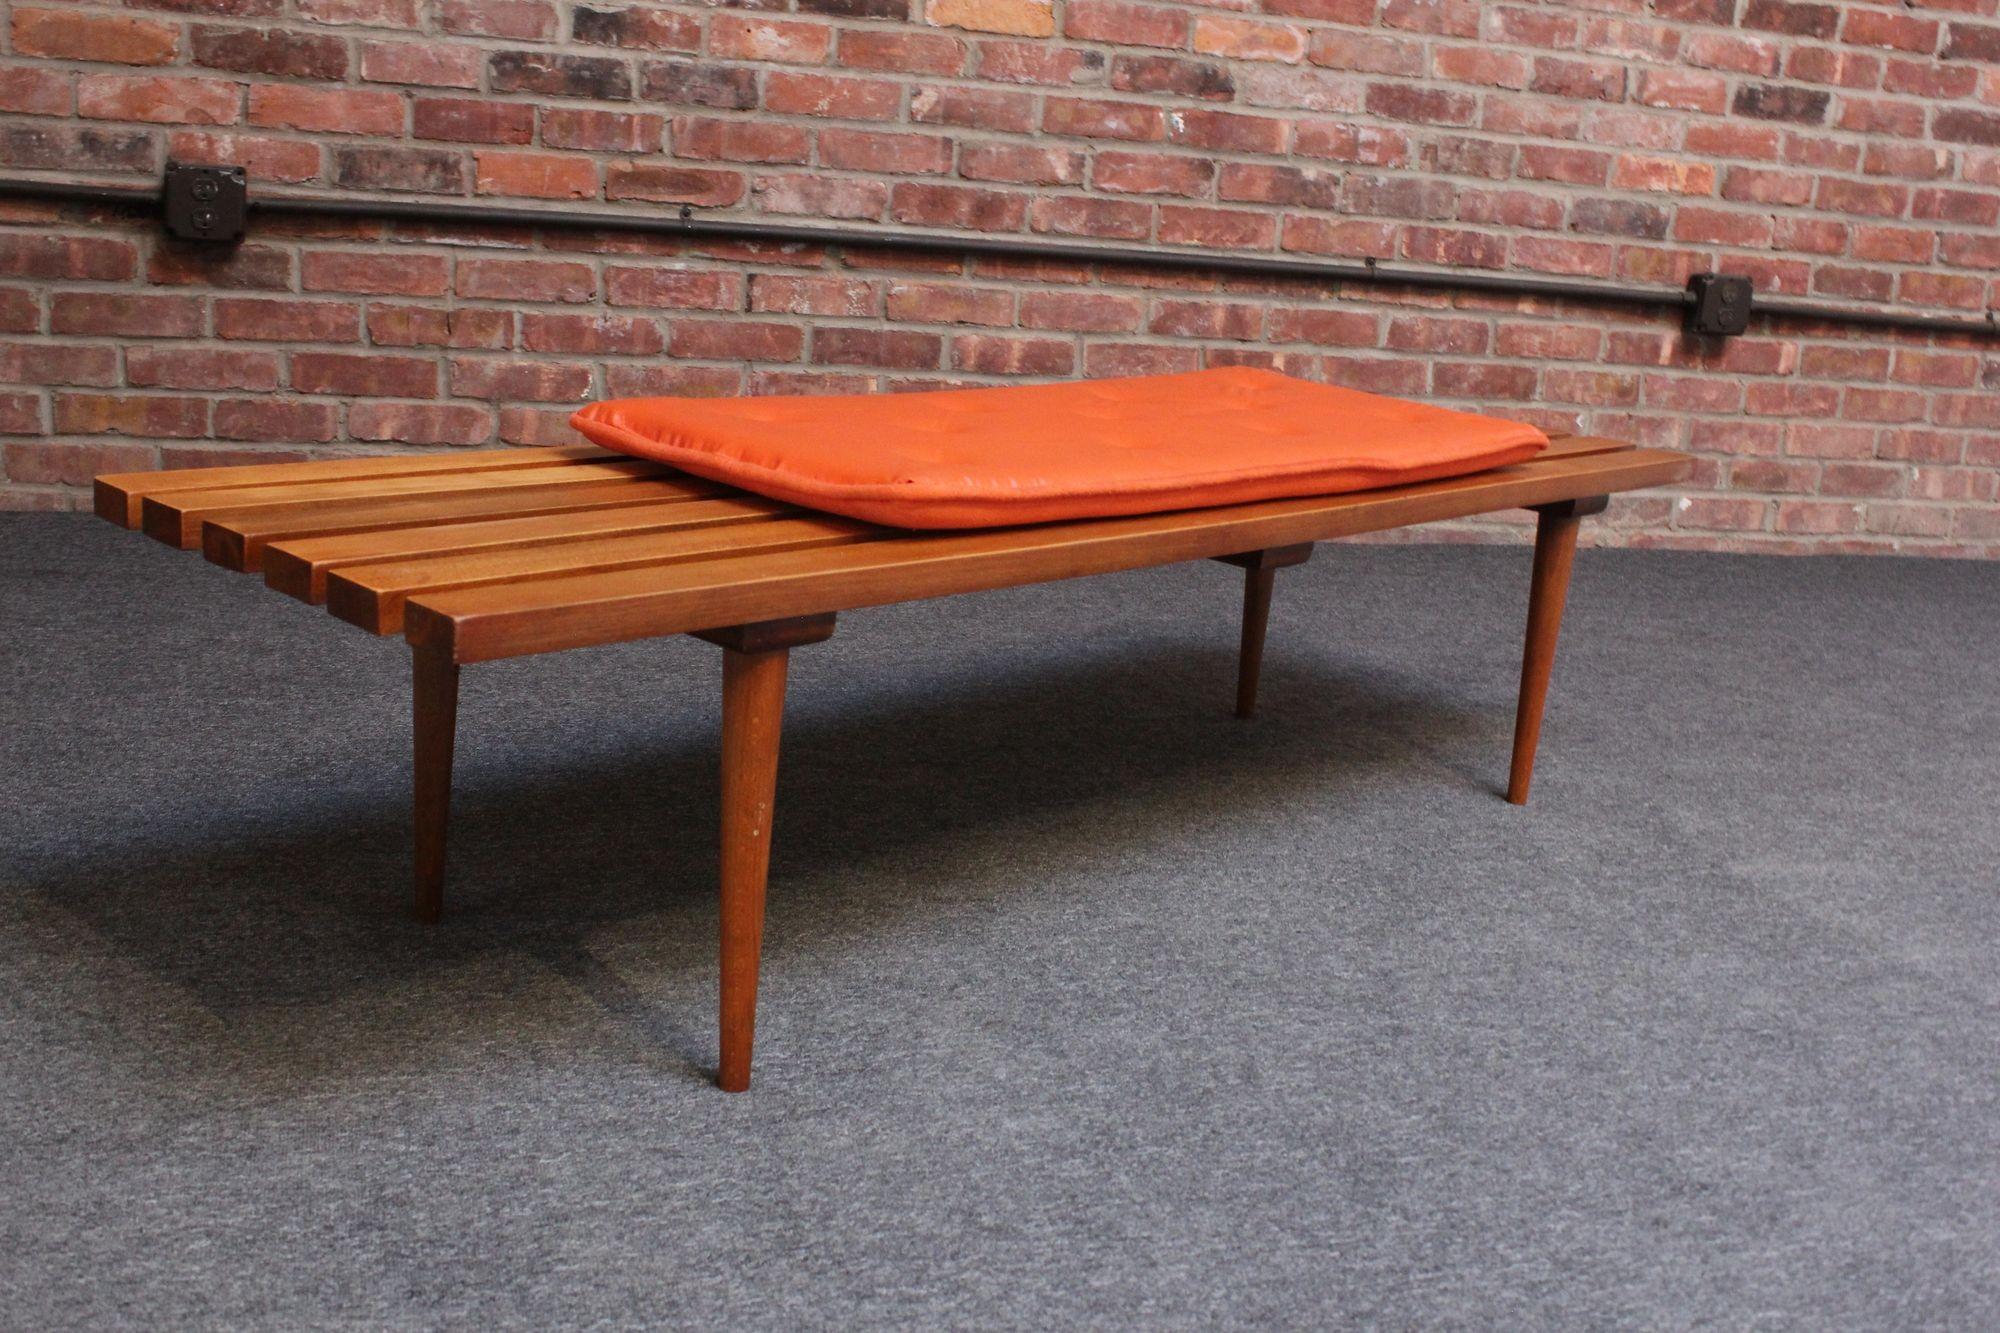 Classic Mid-Century American Modern slatted oak bench or coffee table supported by four, slim, tapered legs (ca. 1950s, USA).
Includes a removable orange vinyl cushion
Conservatively refinished condition but light wear remains (minor